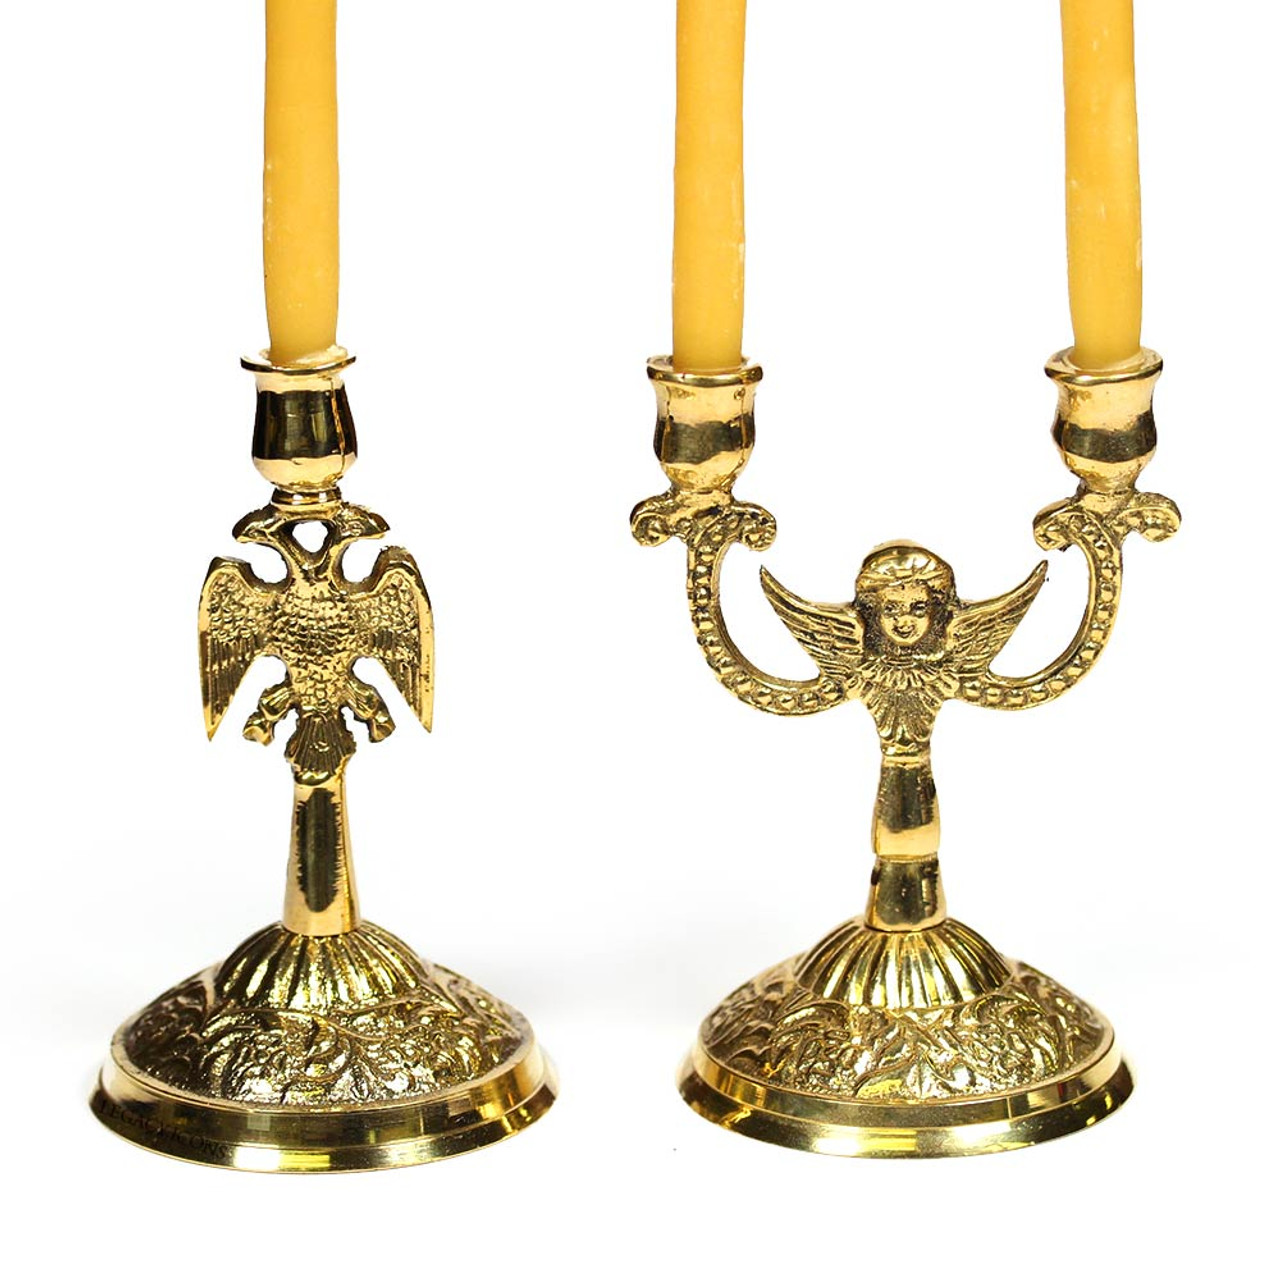 https://cdn11.bigcommerce.com/s-8npwm6ltcj/images/stencil/1280x1280/products/498/767/brass-byzantine-beeswax-candle-holders-legacy-icons__20758__72816.1698178088.jpg?c=1&imbypass=on